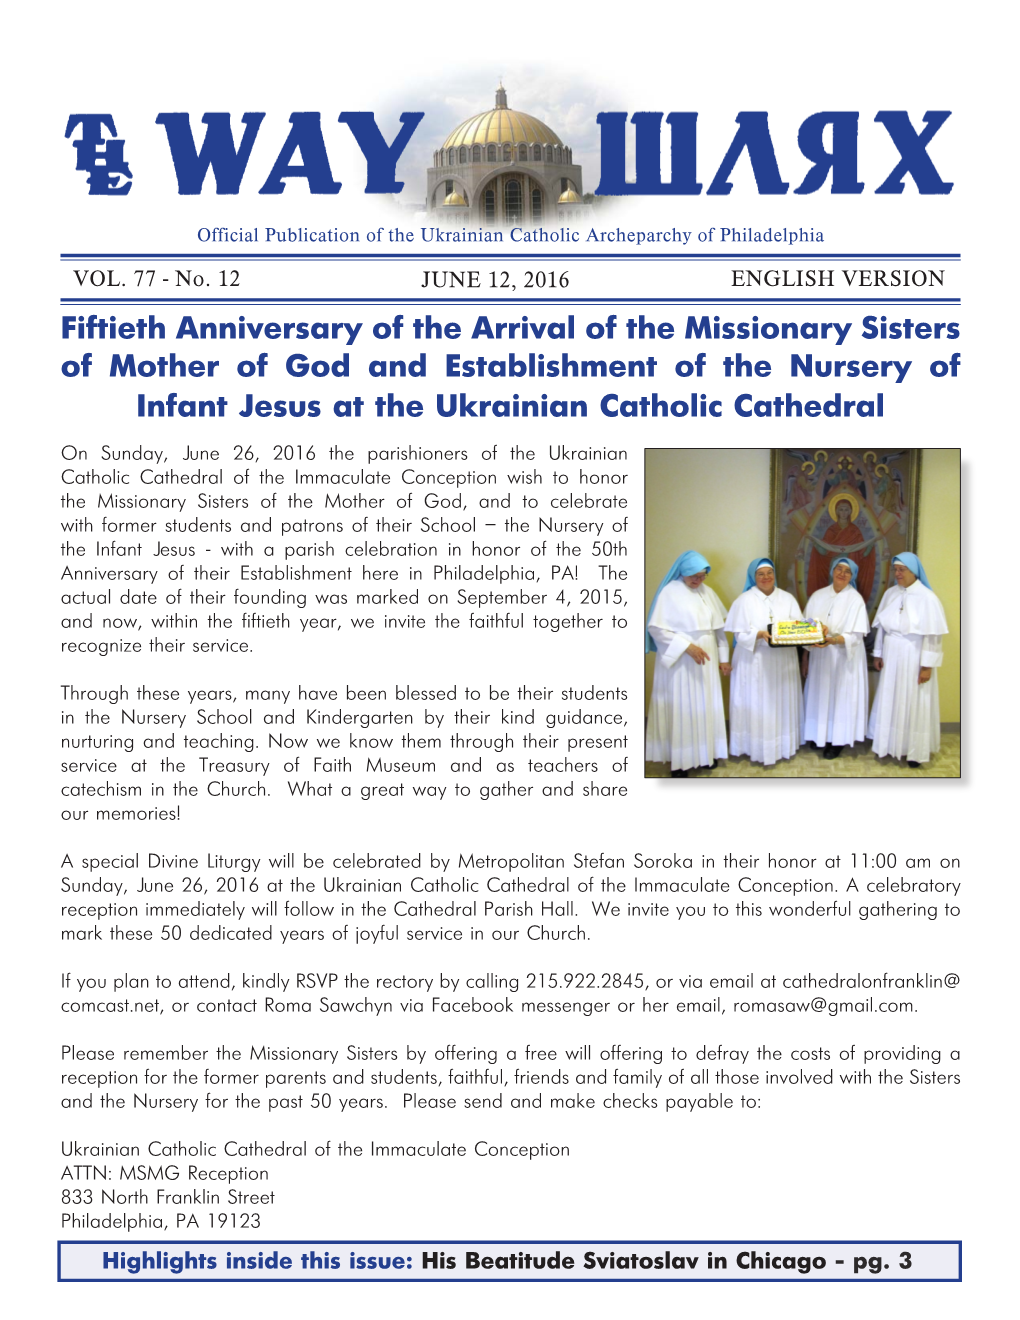 Fiftieth Anniversary of the Arrival of the Missionary Sisters of Mother of God and Establishment of the Nursery of Infant Jesus at the Ukrainian Catholic Cathedral